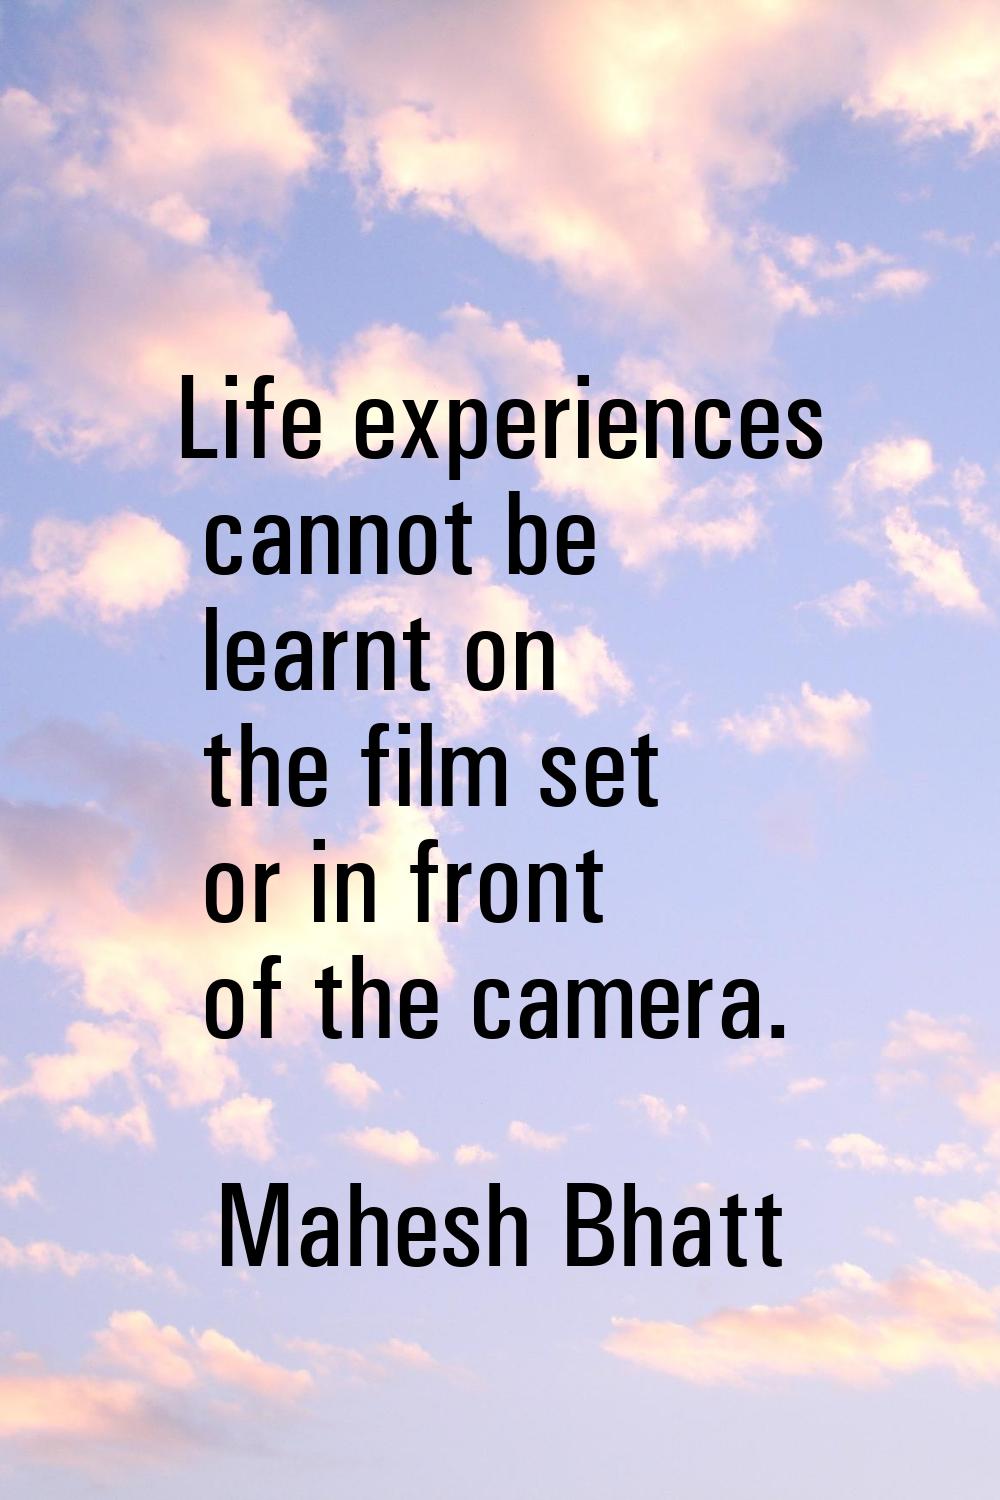 Life experiences cannot be learnt on the film set or in front of the camera.